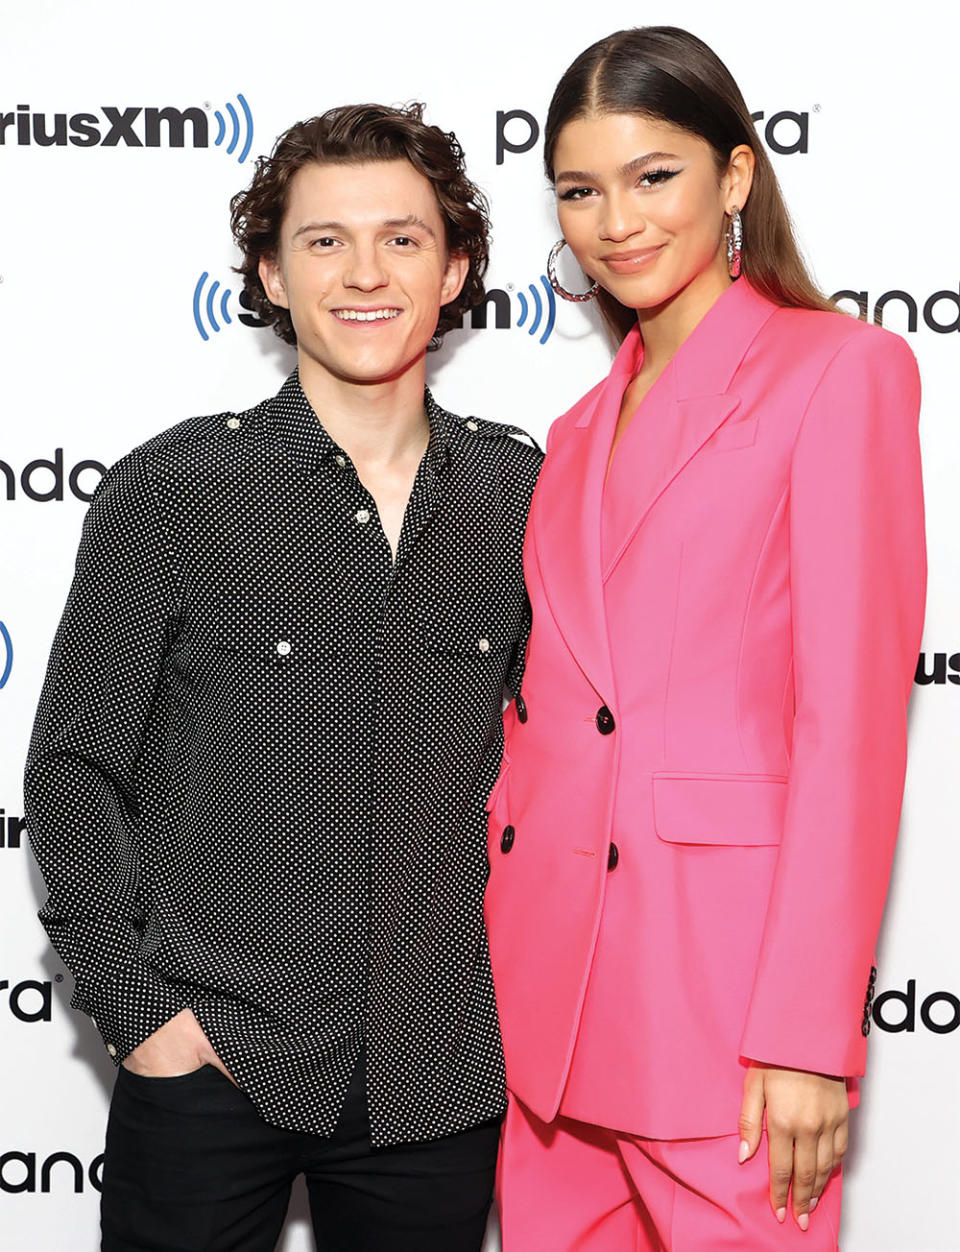 Holland and girlfriend Zendaya promoted their film Spider-Man: No Way Home in 2021